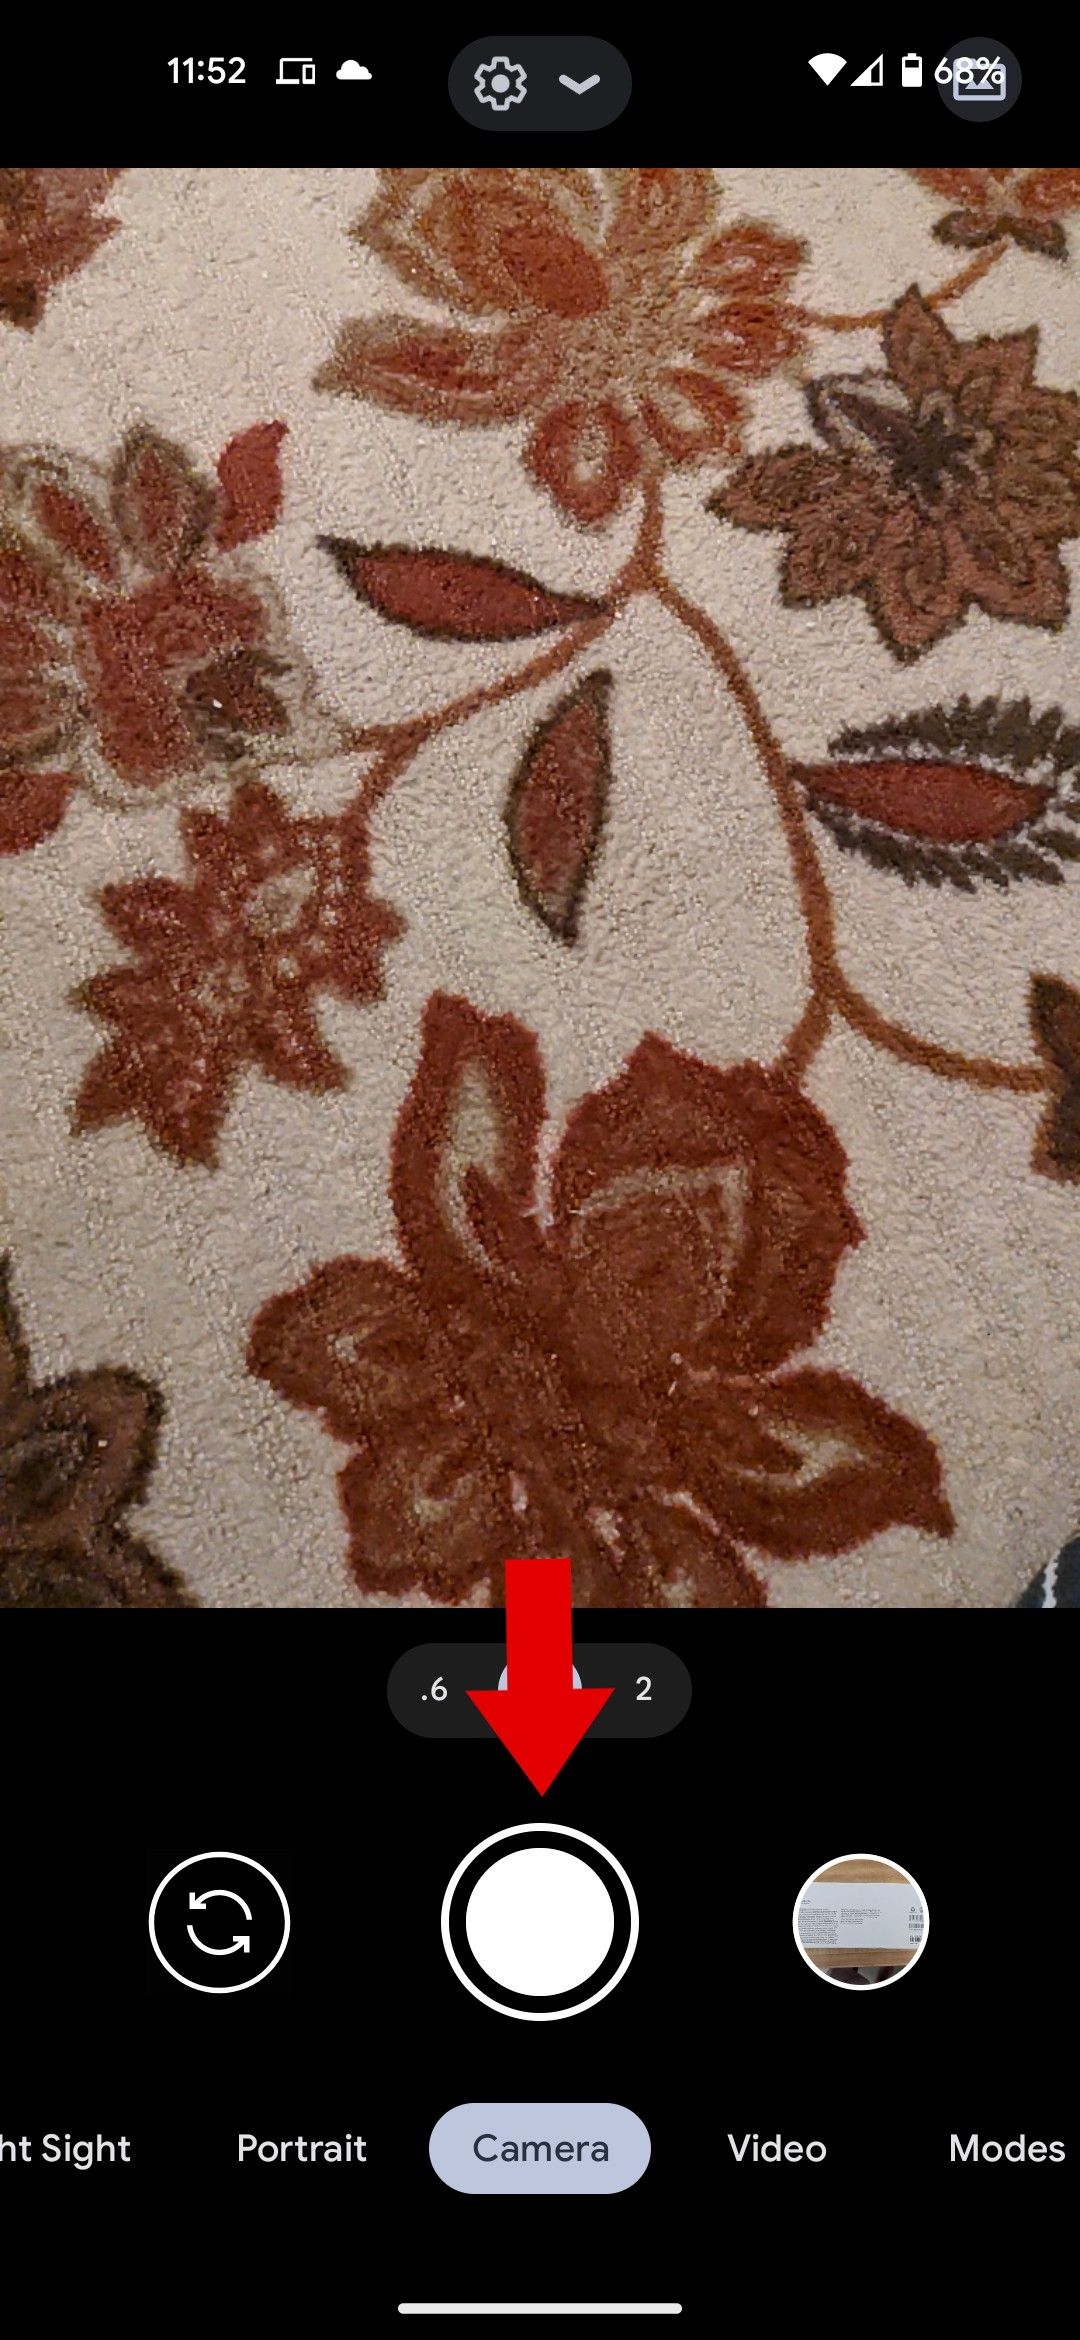 The Google camera app with a red arrow pointing to the shutter button.